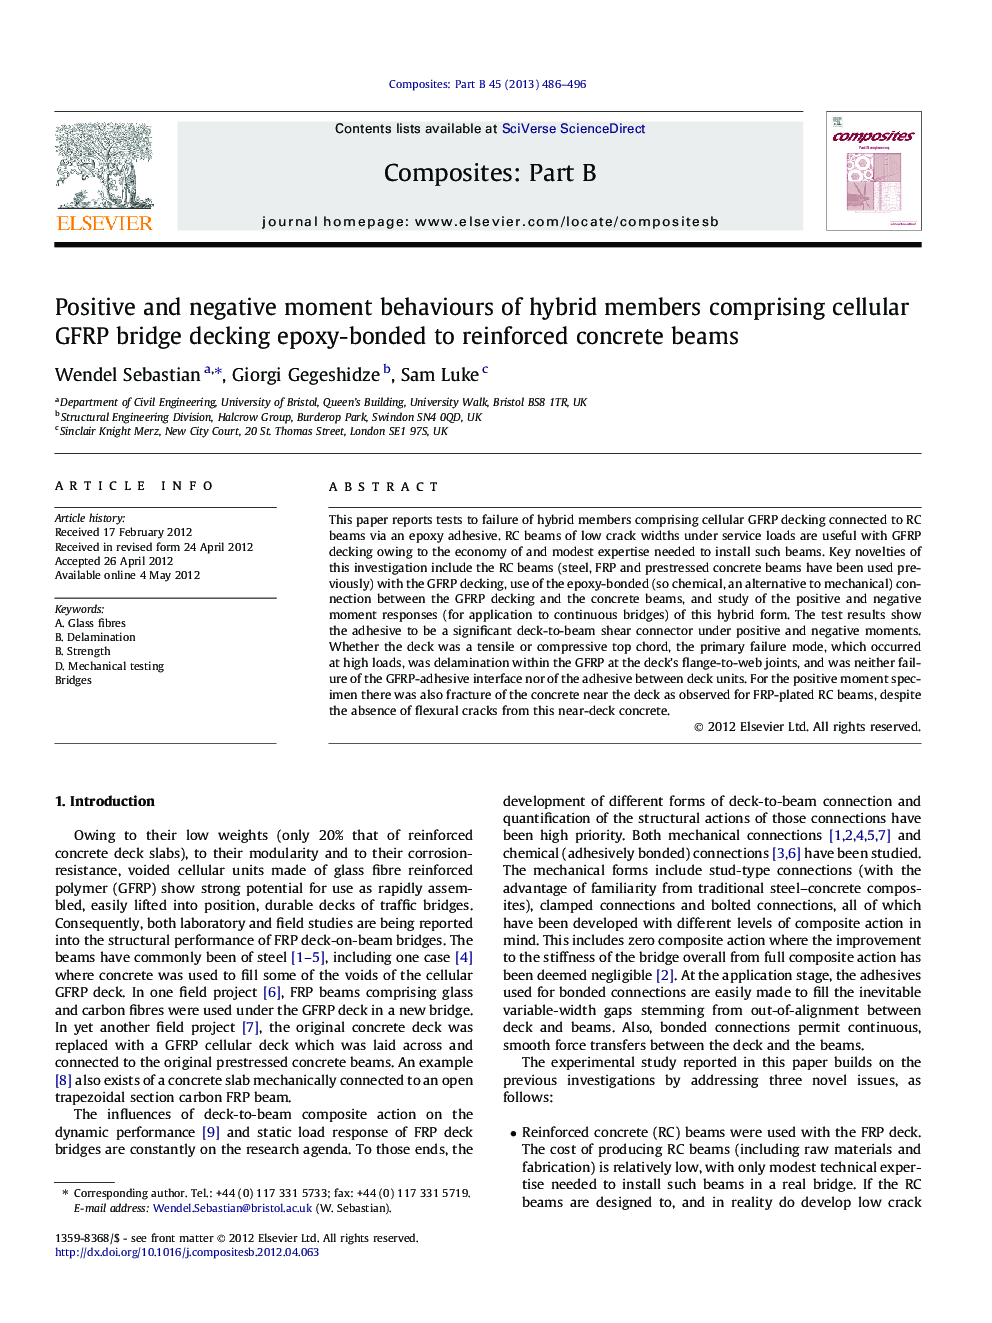 Positive and negative moment behaviours of hybrid members comprising cellular GFRP bridge decking epoxy-bonded to reinforced concrete beams